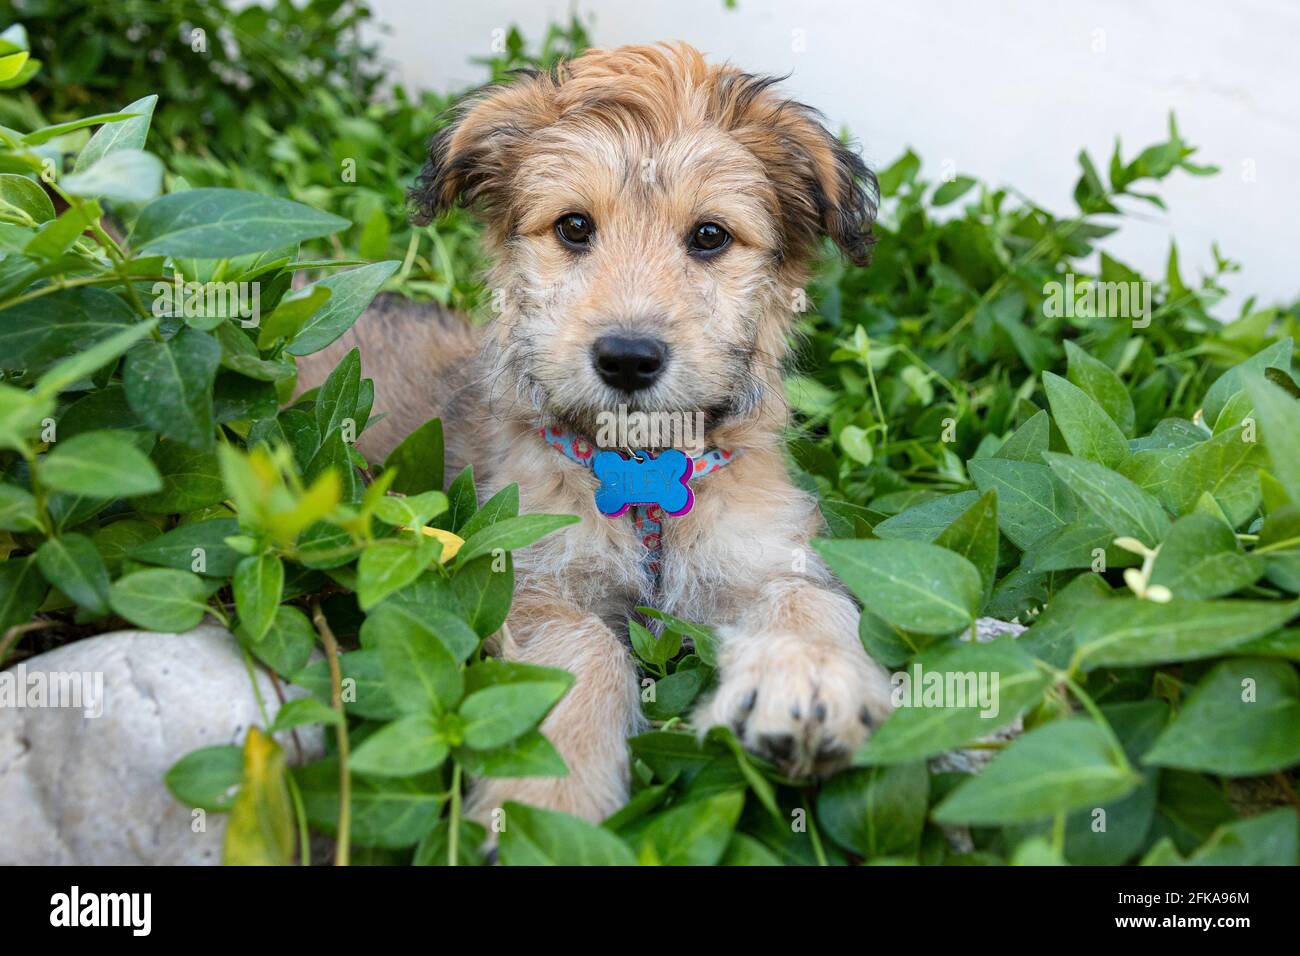 Mixed poodle breed puppy sitting in the garden plants. Stock Photo